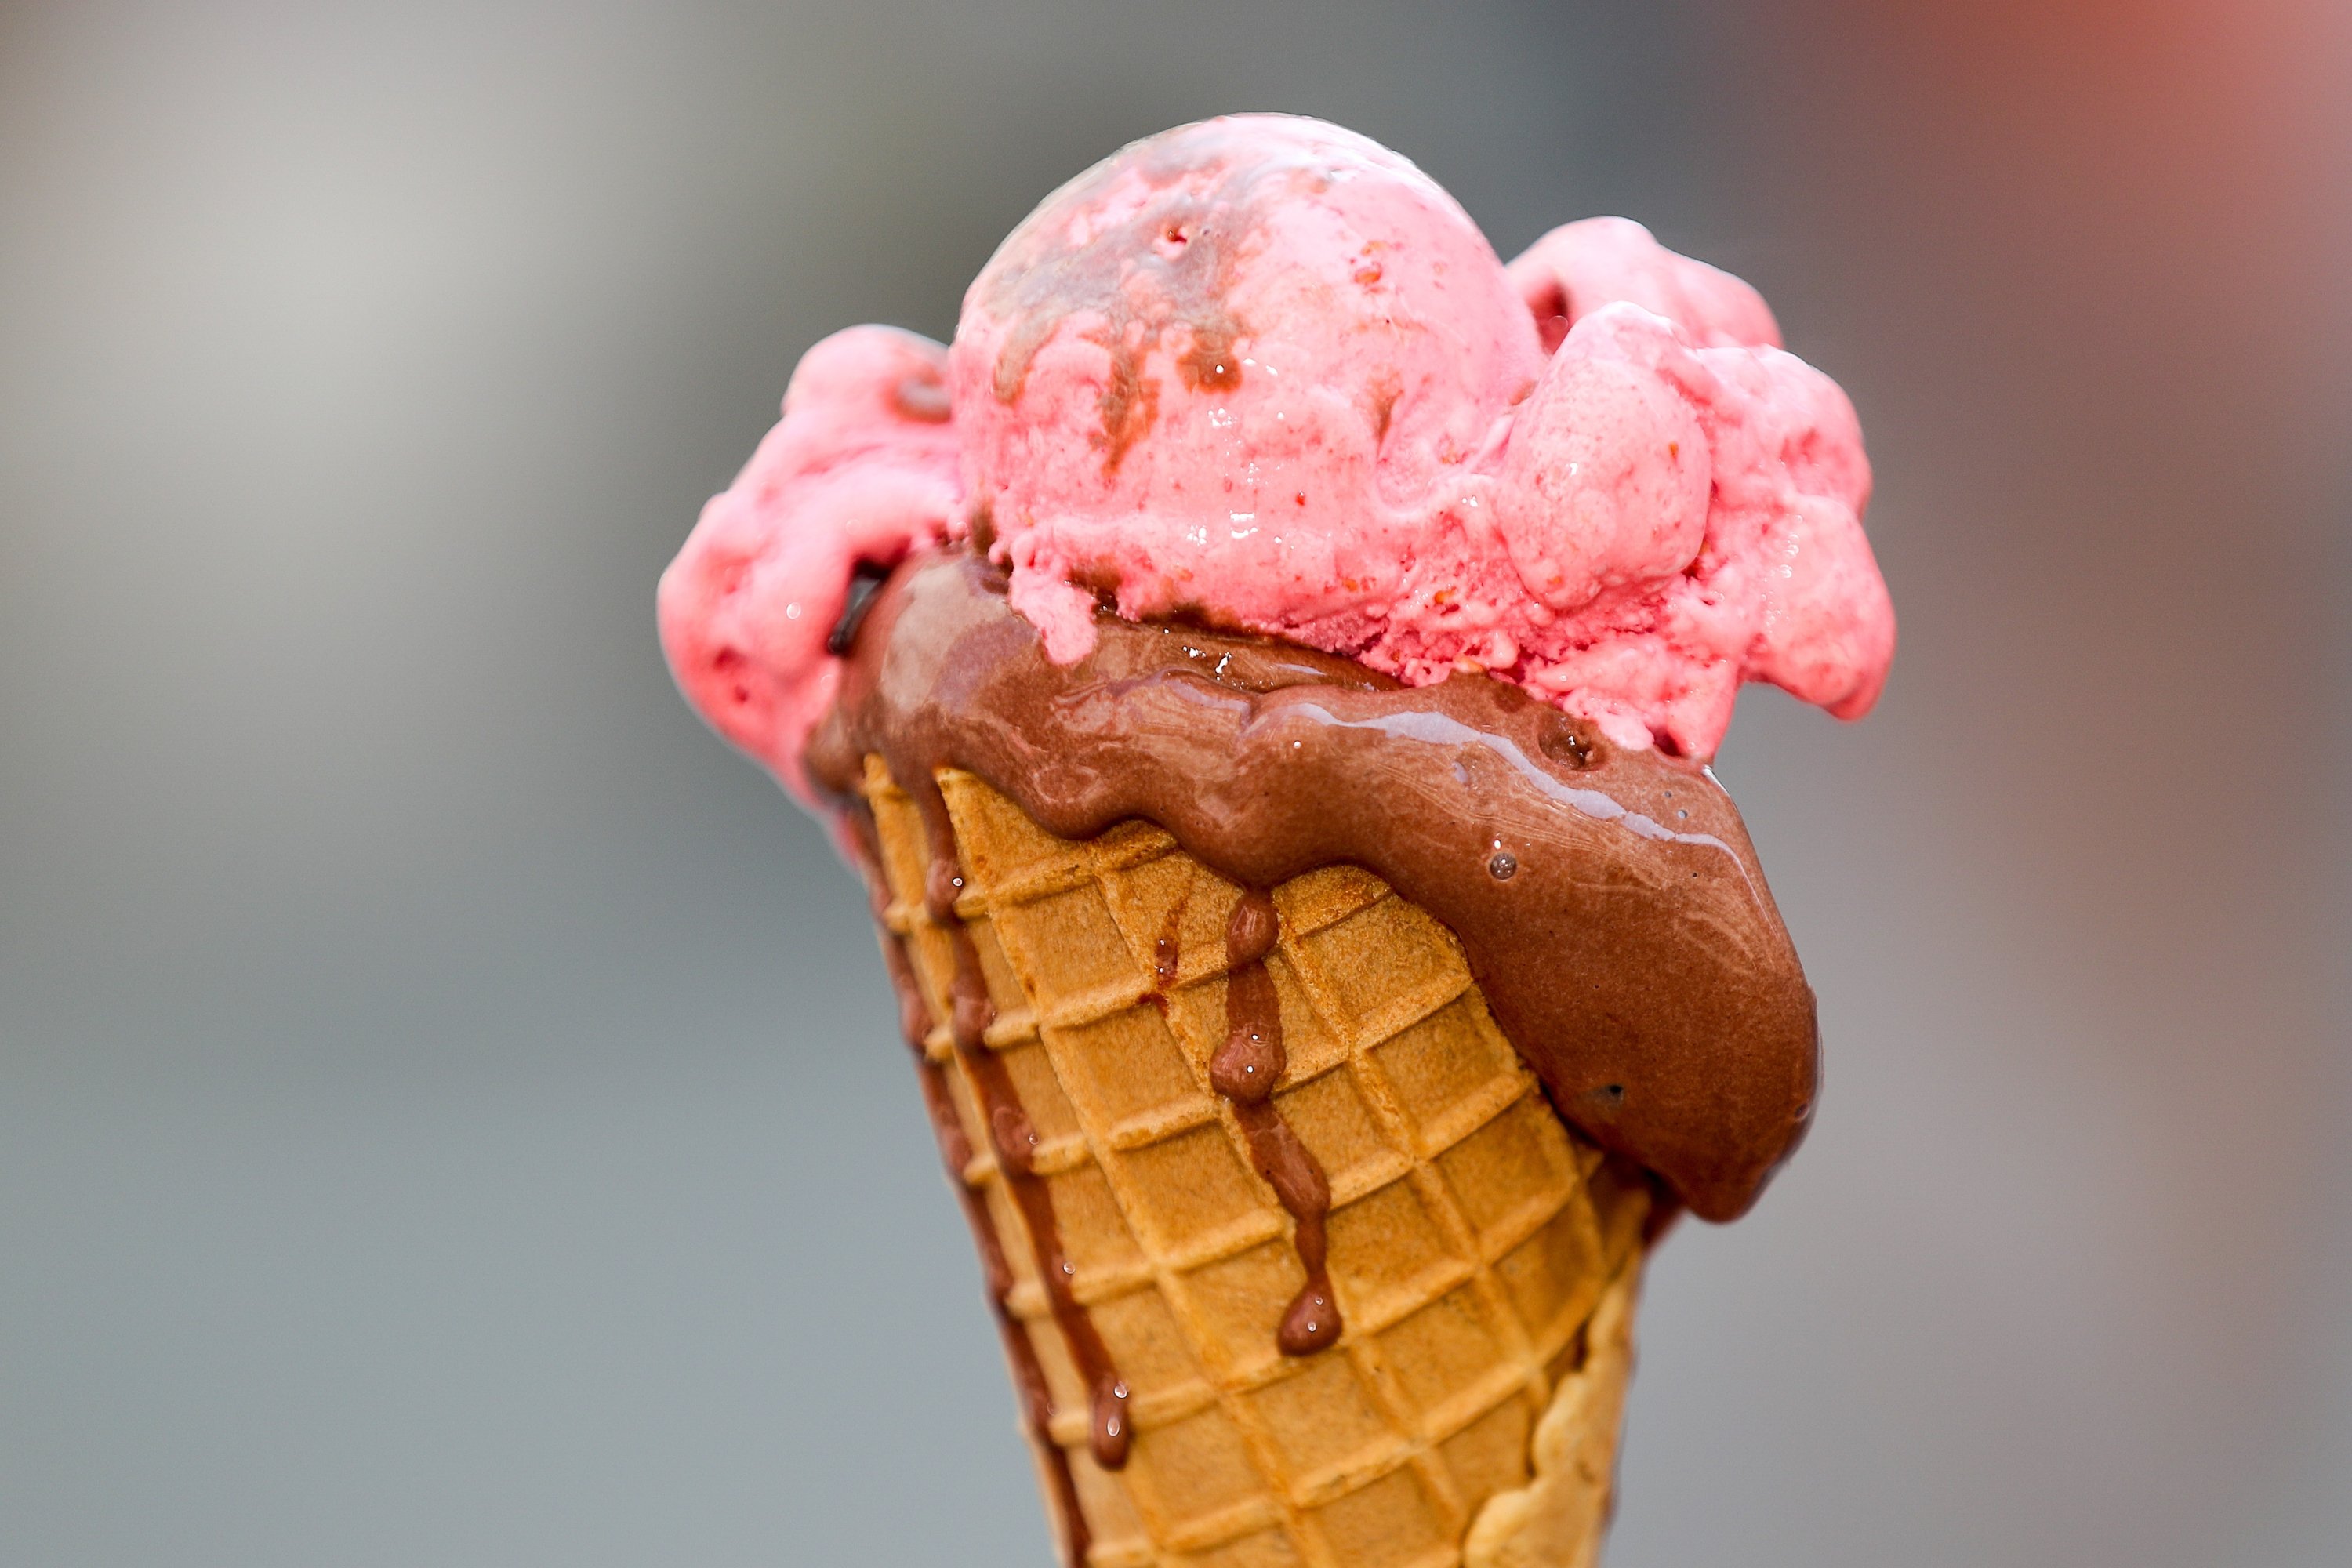 A dripping ice cream with the varieties raspberry and chocolate. The heat wave in Saxony is heading for a new annual record, Leipzig, Germany, July 31, 2018. (DPA Photo)